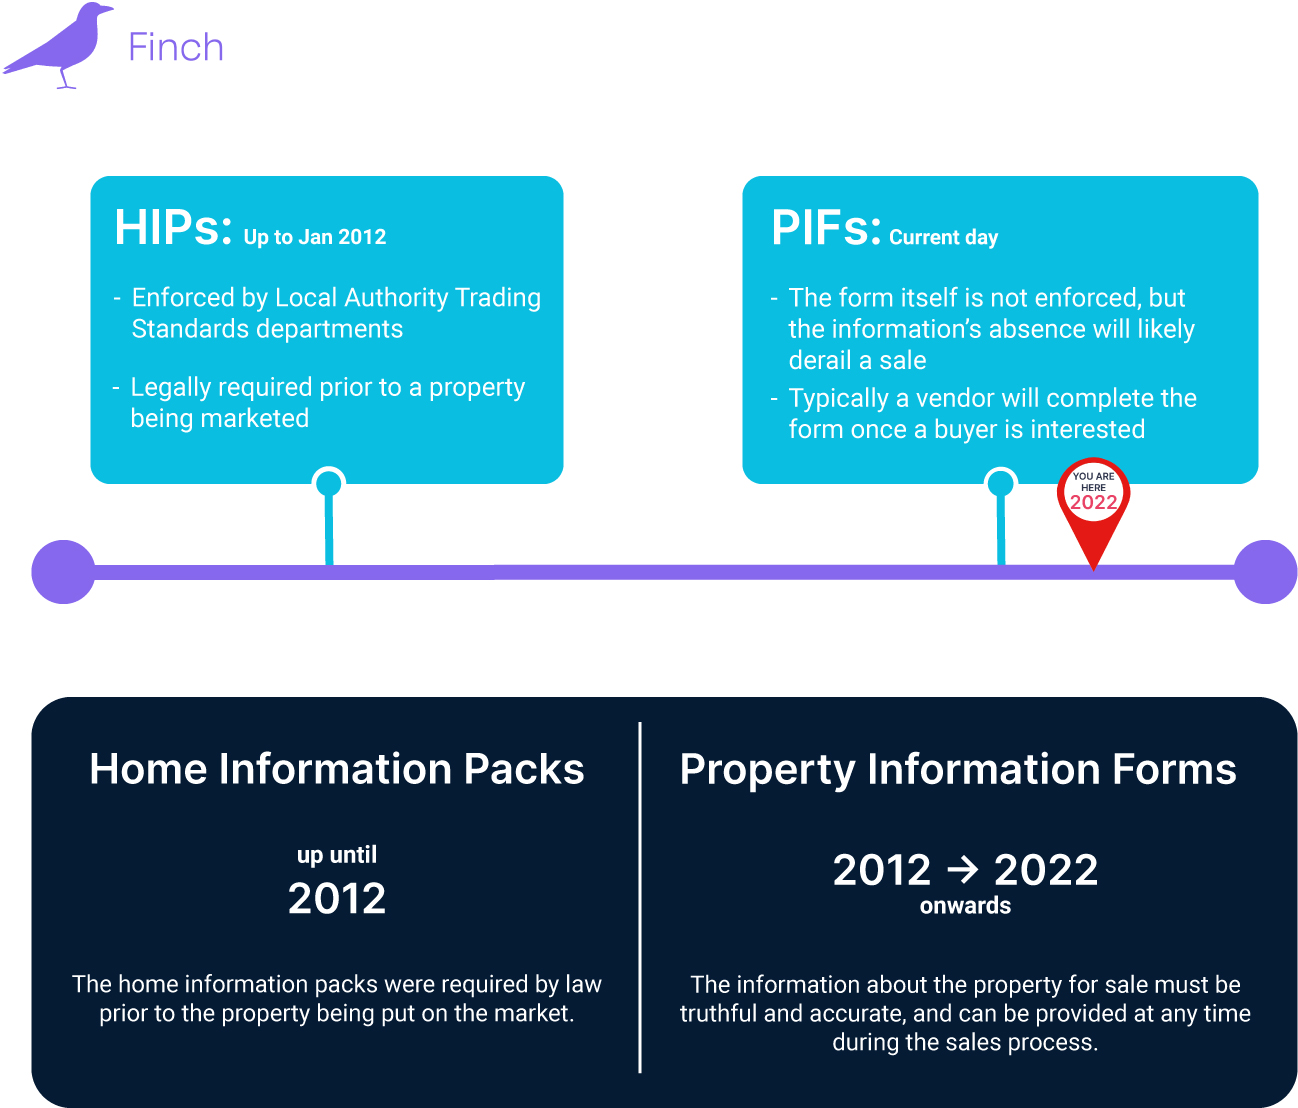 Finch Property Information Form